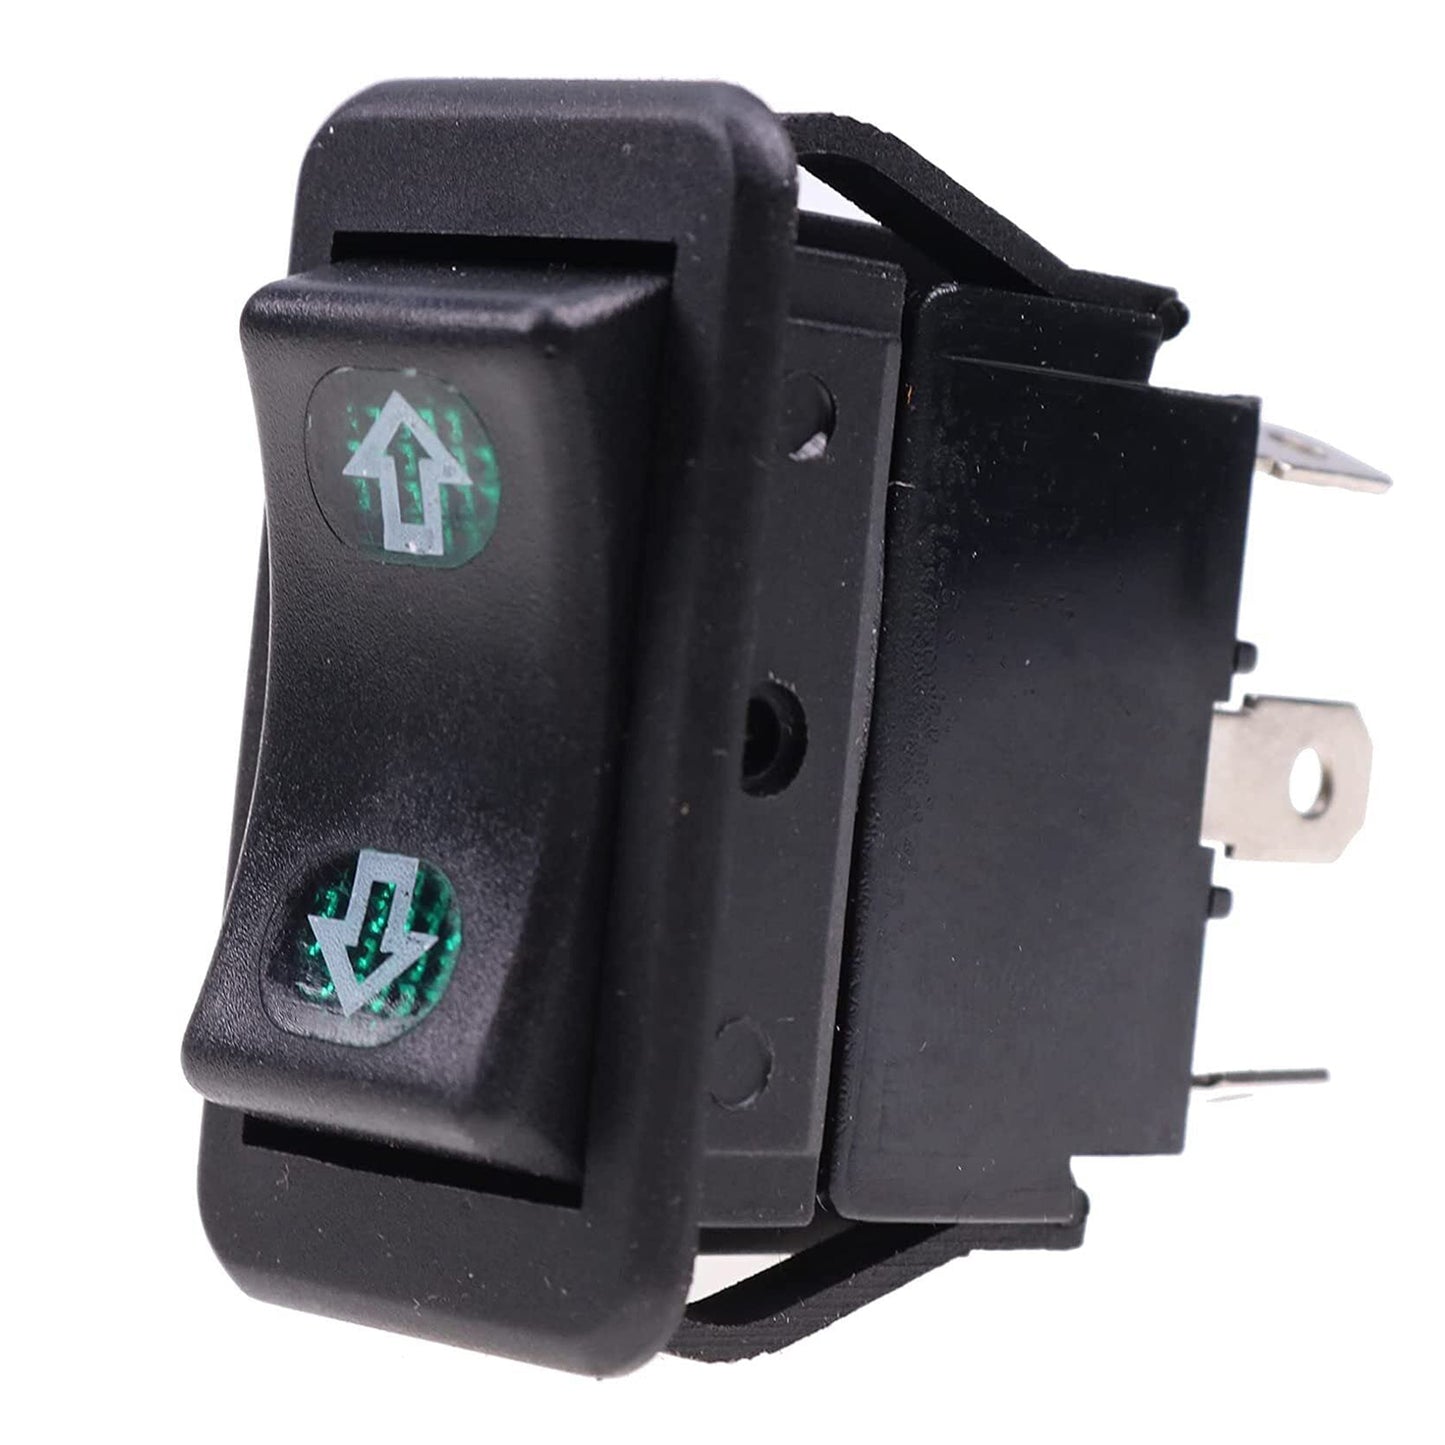 AM116574 Turn Signal Switch Compatible With John Deere 2020 2020A 2030A 4X2 4X4 625i